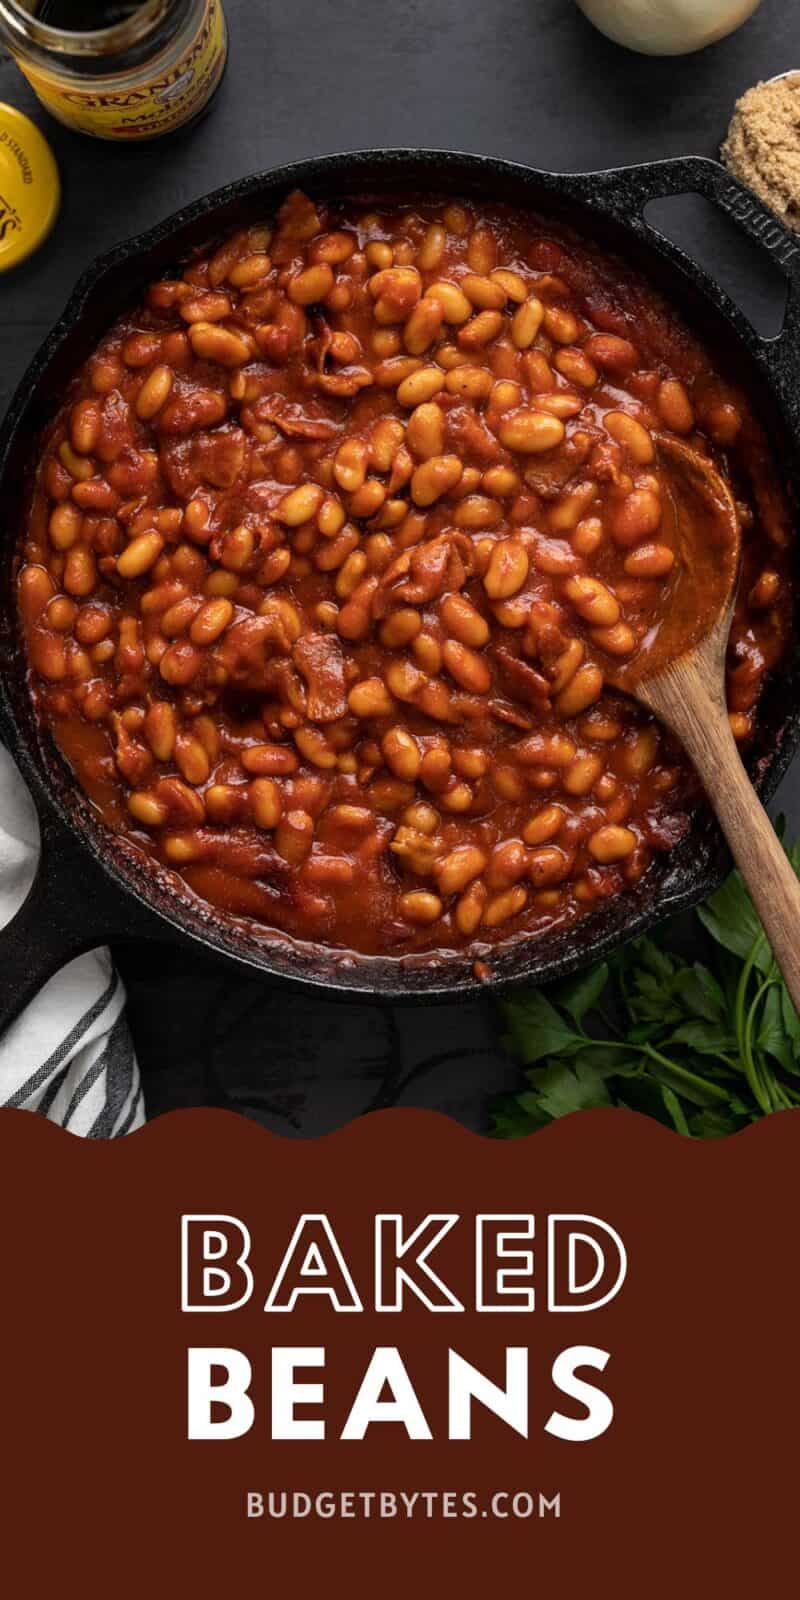 Overhead view of baked beans in a cast iron skillet.